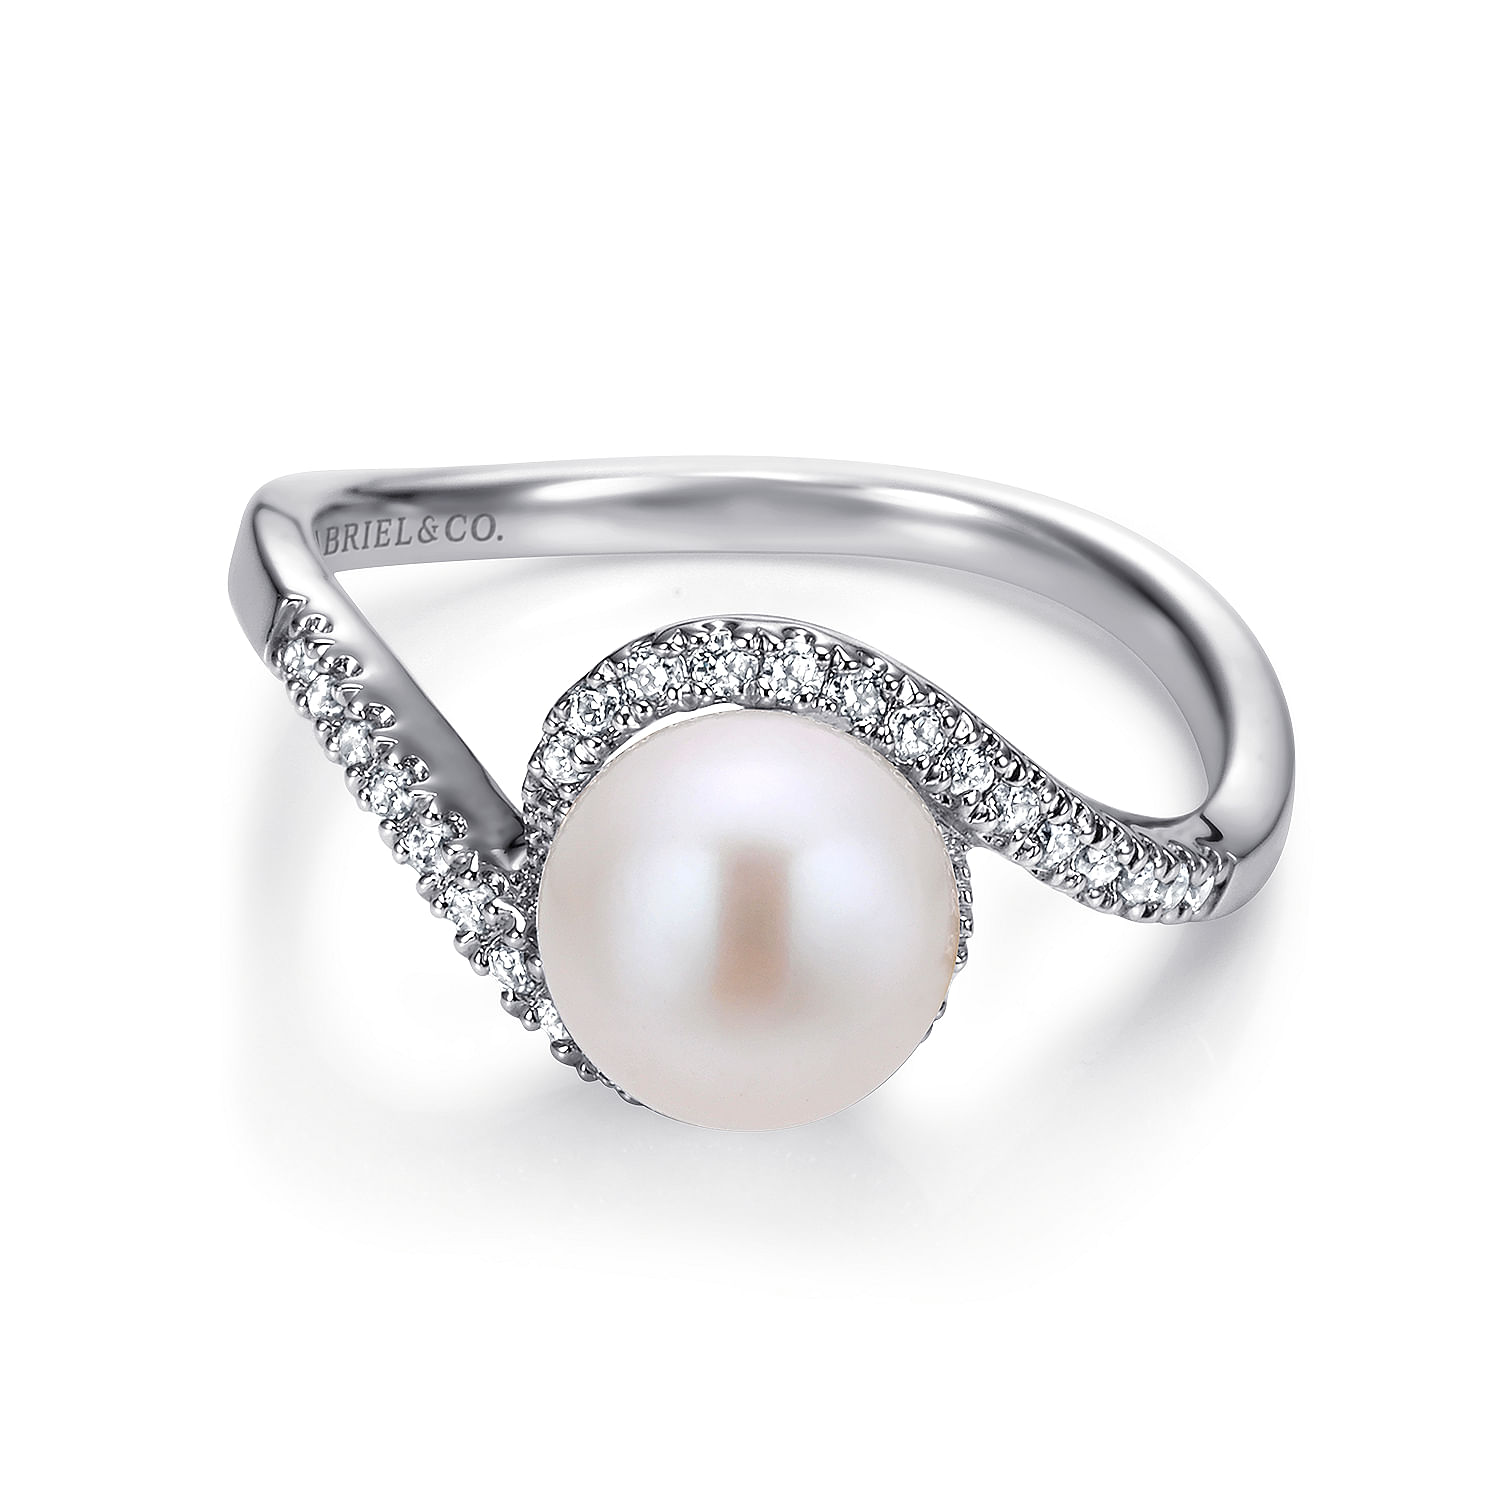 14k White Gold Cultured Pearl Diamond Bypass Ring